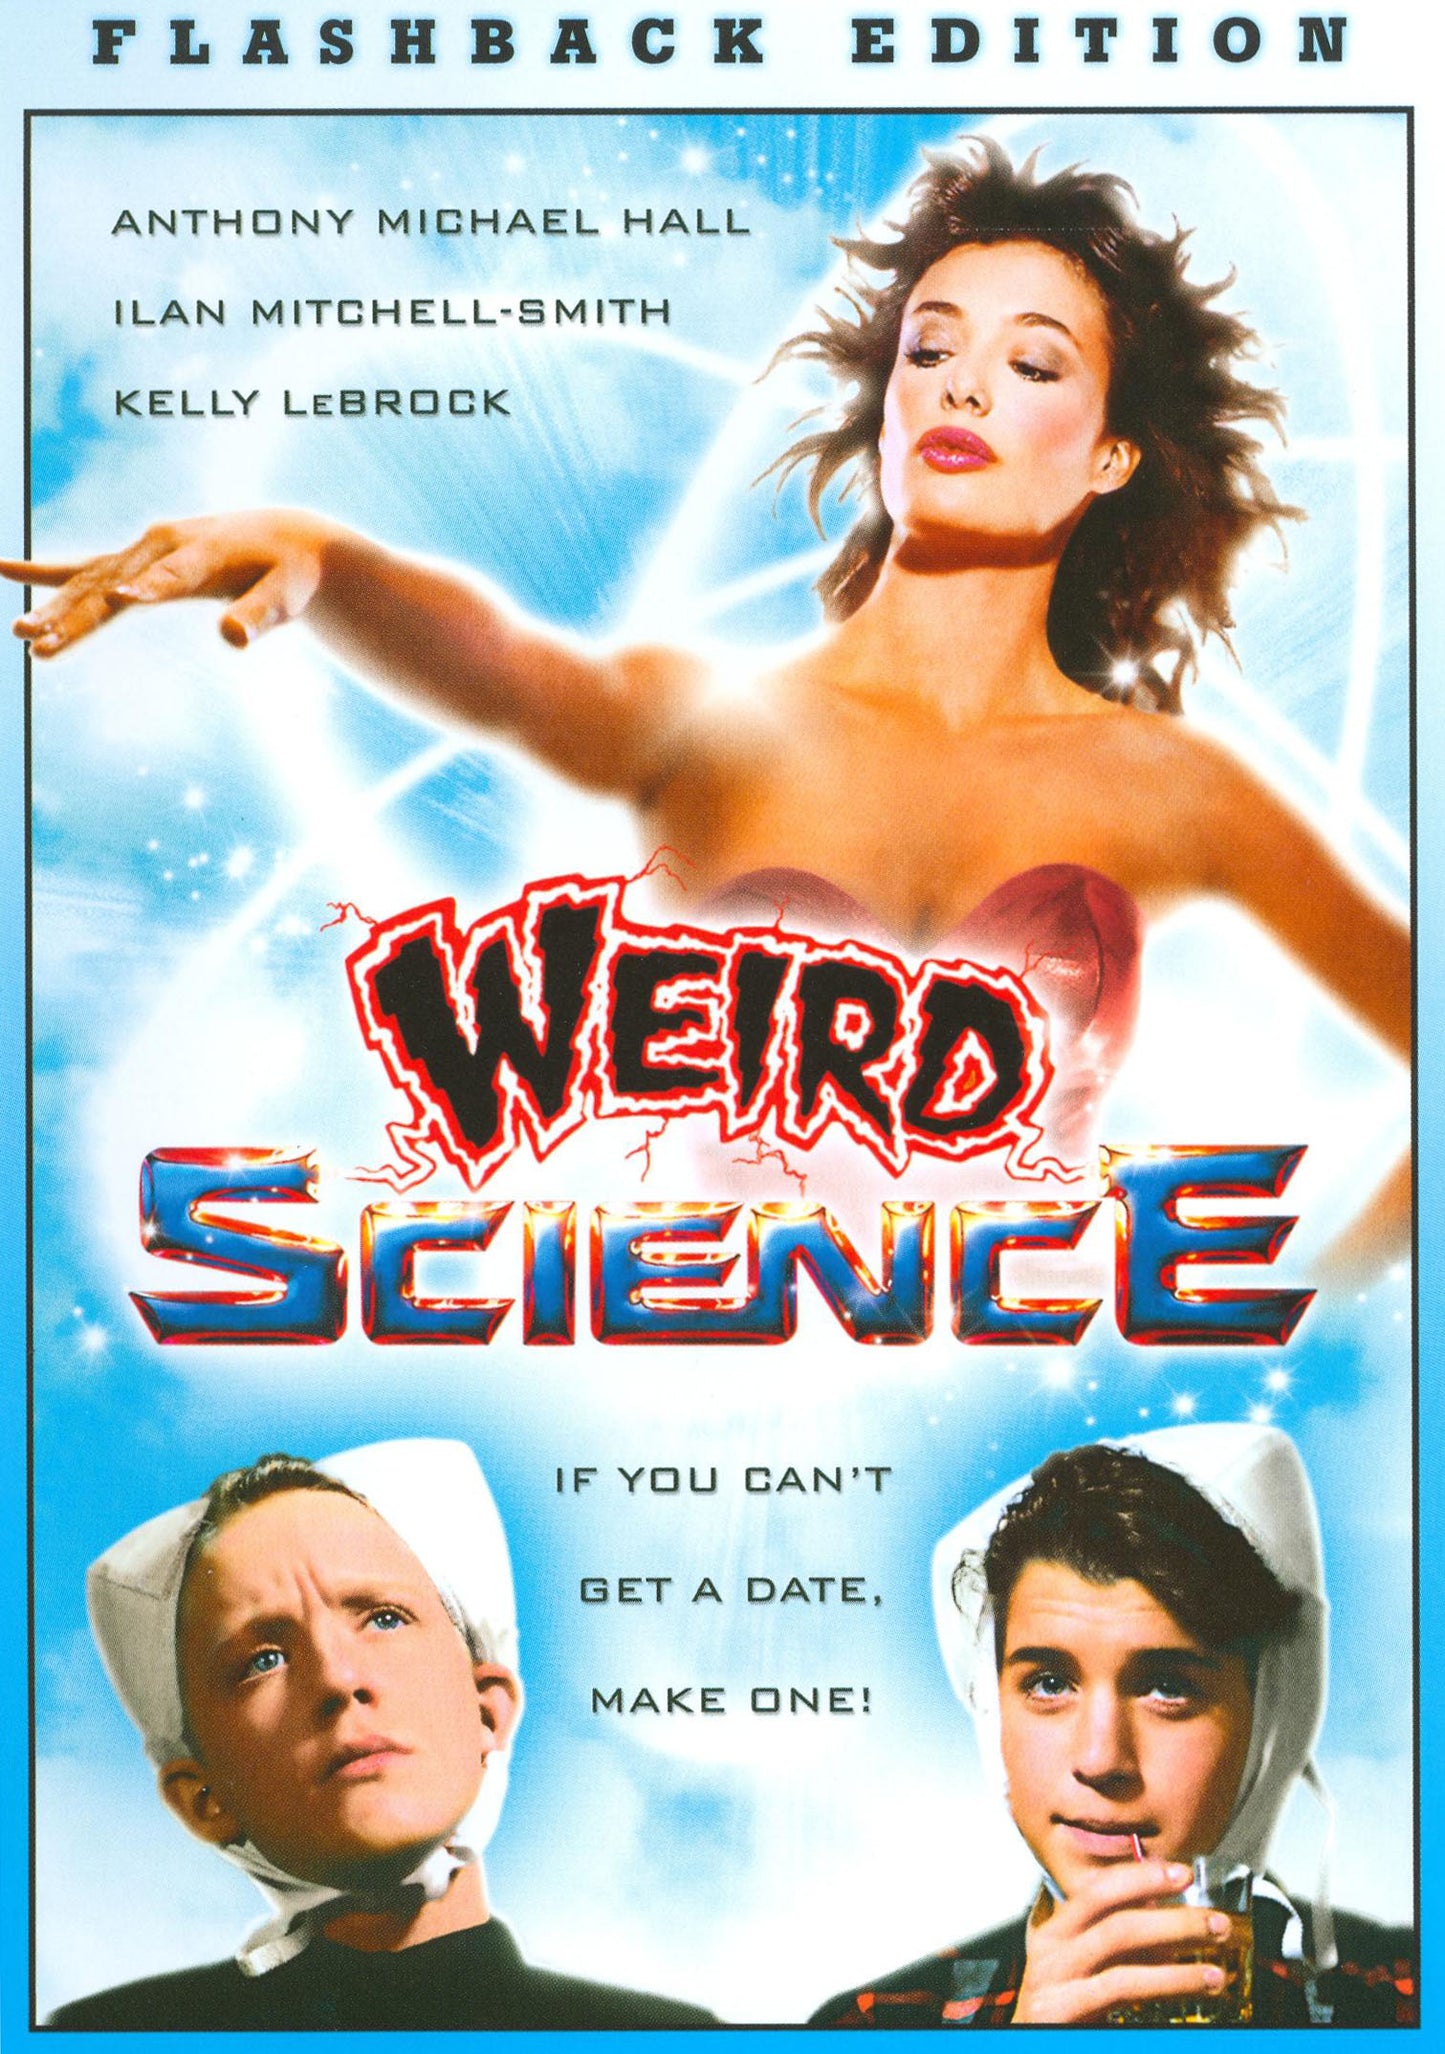 Weird Science [Flashback Edition] cover art